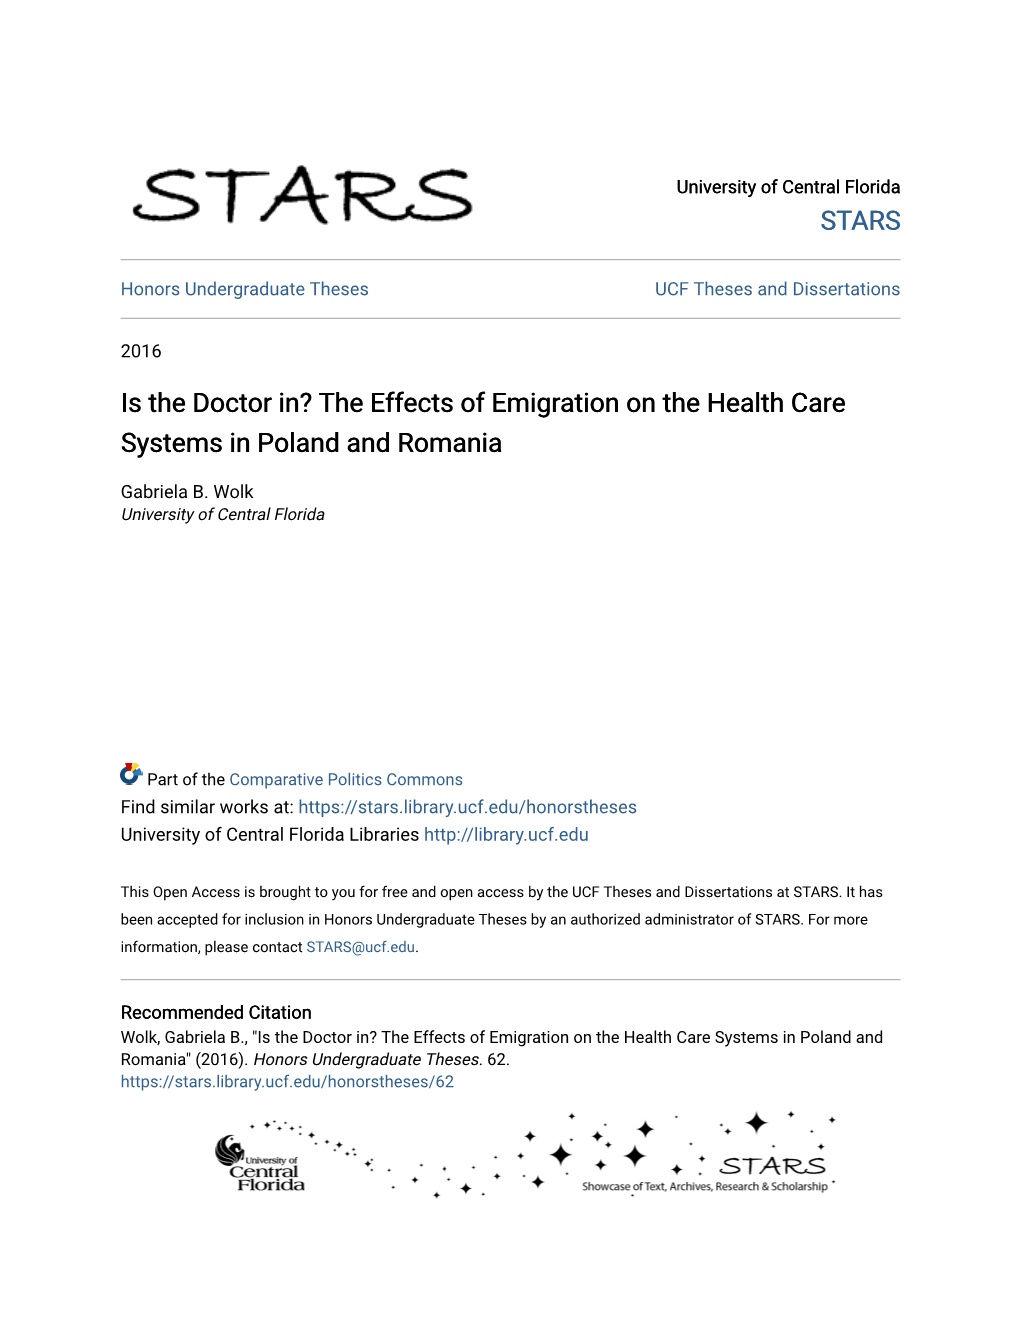 The Effects of Emigration on the Health Care Systems in Poland and Romania